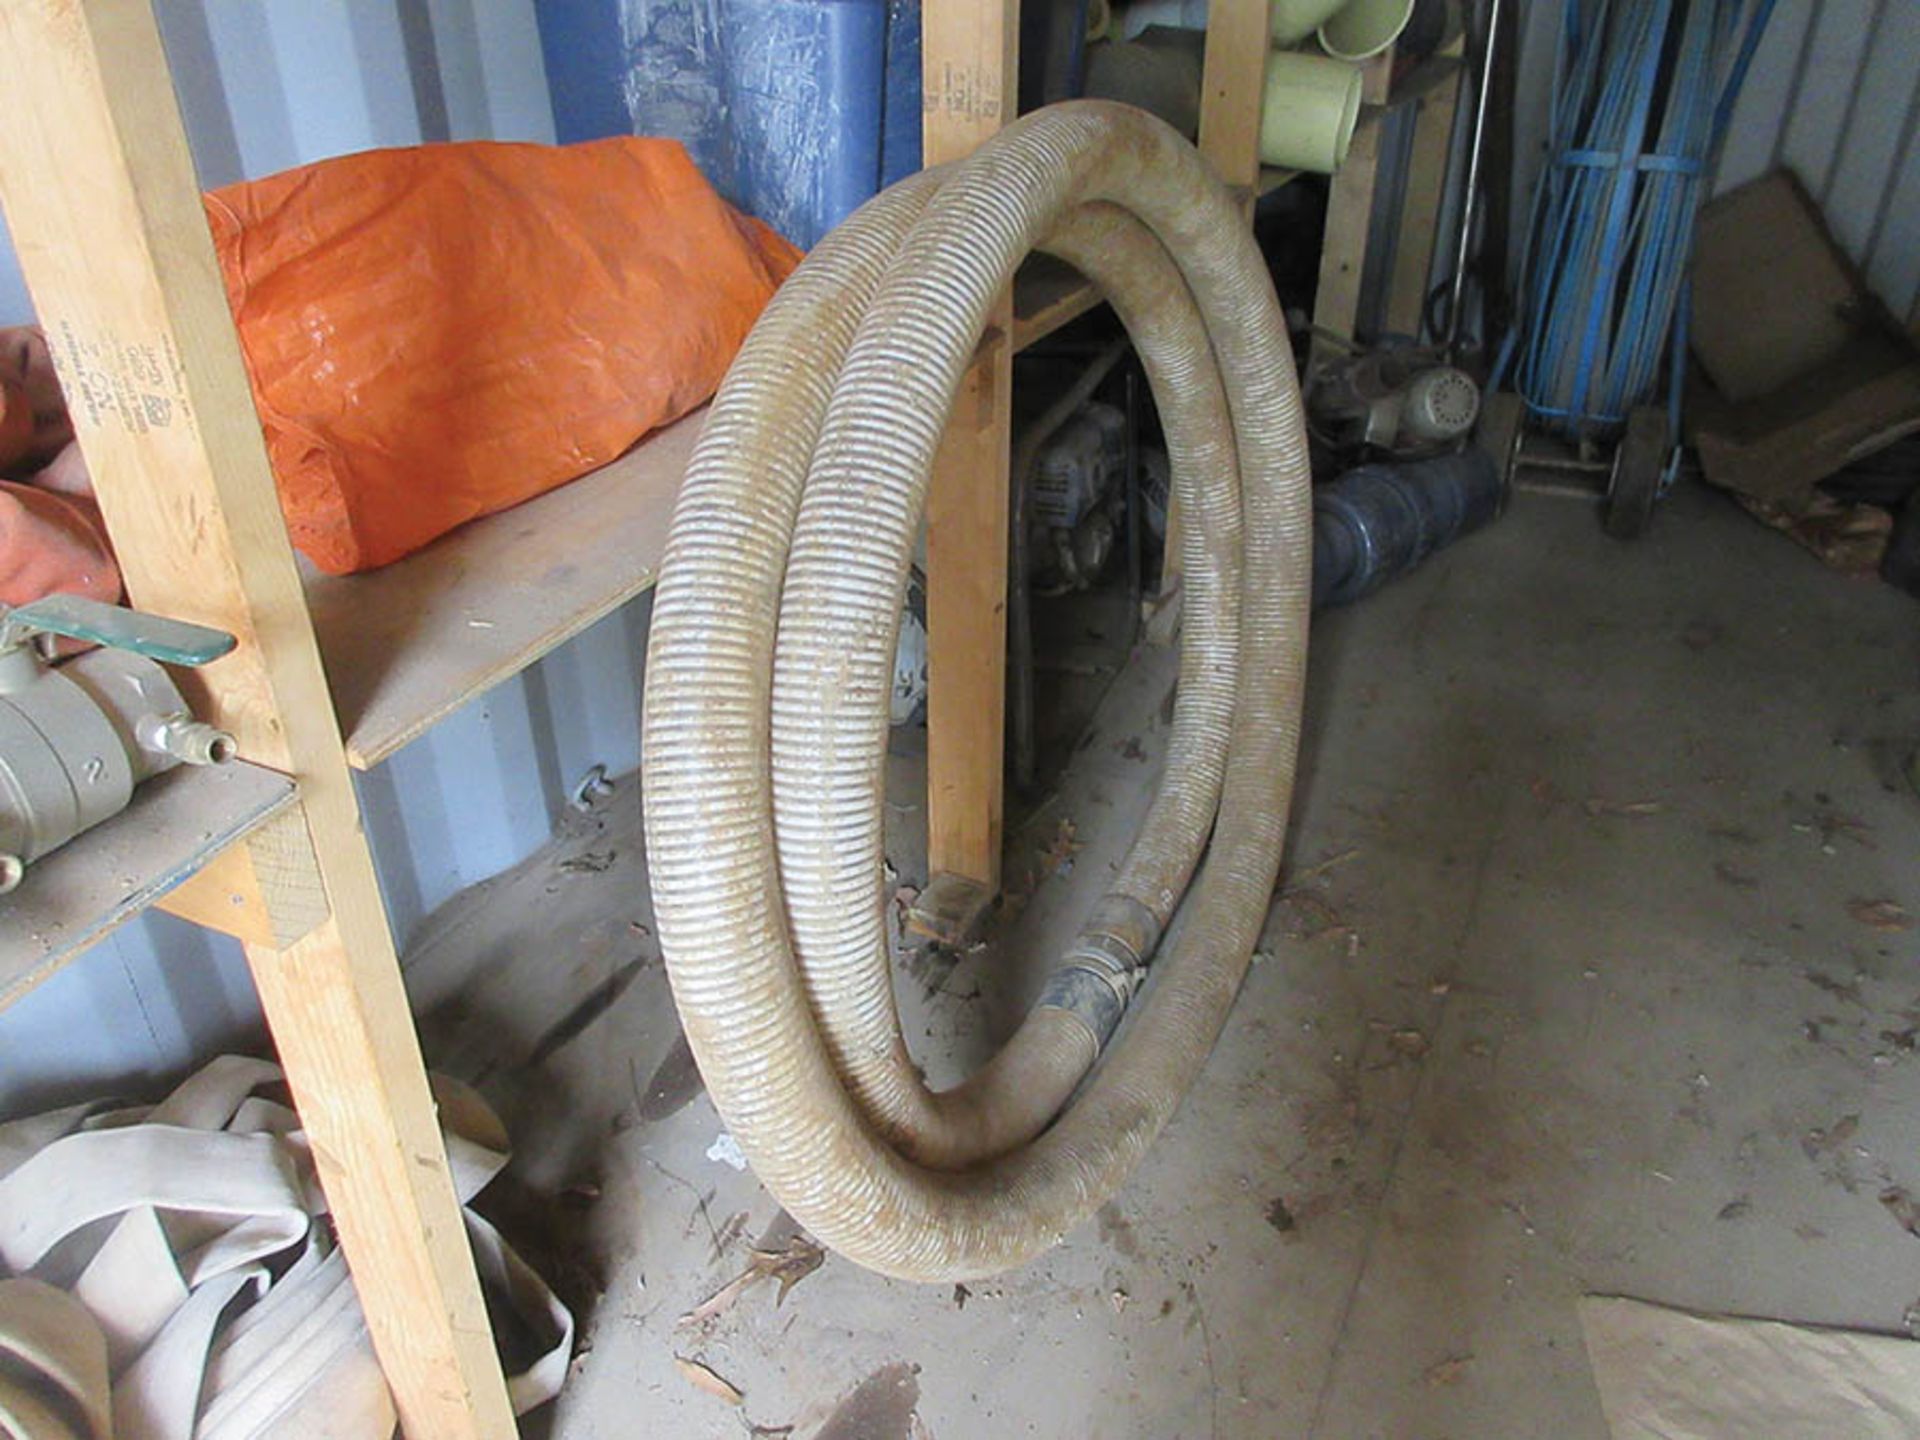 CONTENTS OF CONTAINER - ASSORTED DISCHARGE HOSE, TORCH HOSES, DRILL, AND FISH TAPE SPOOL - Image 4 of 10